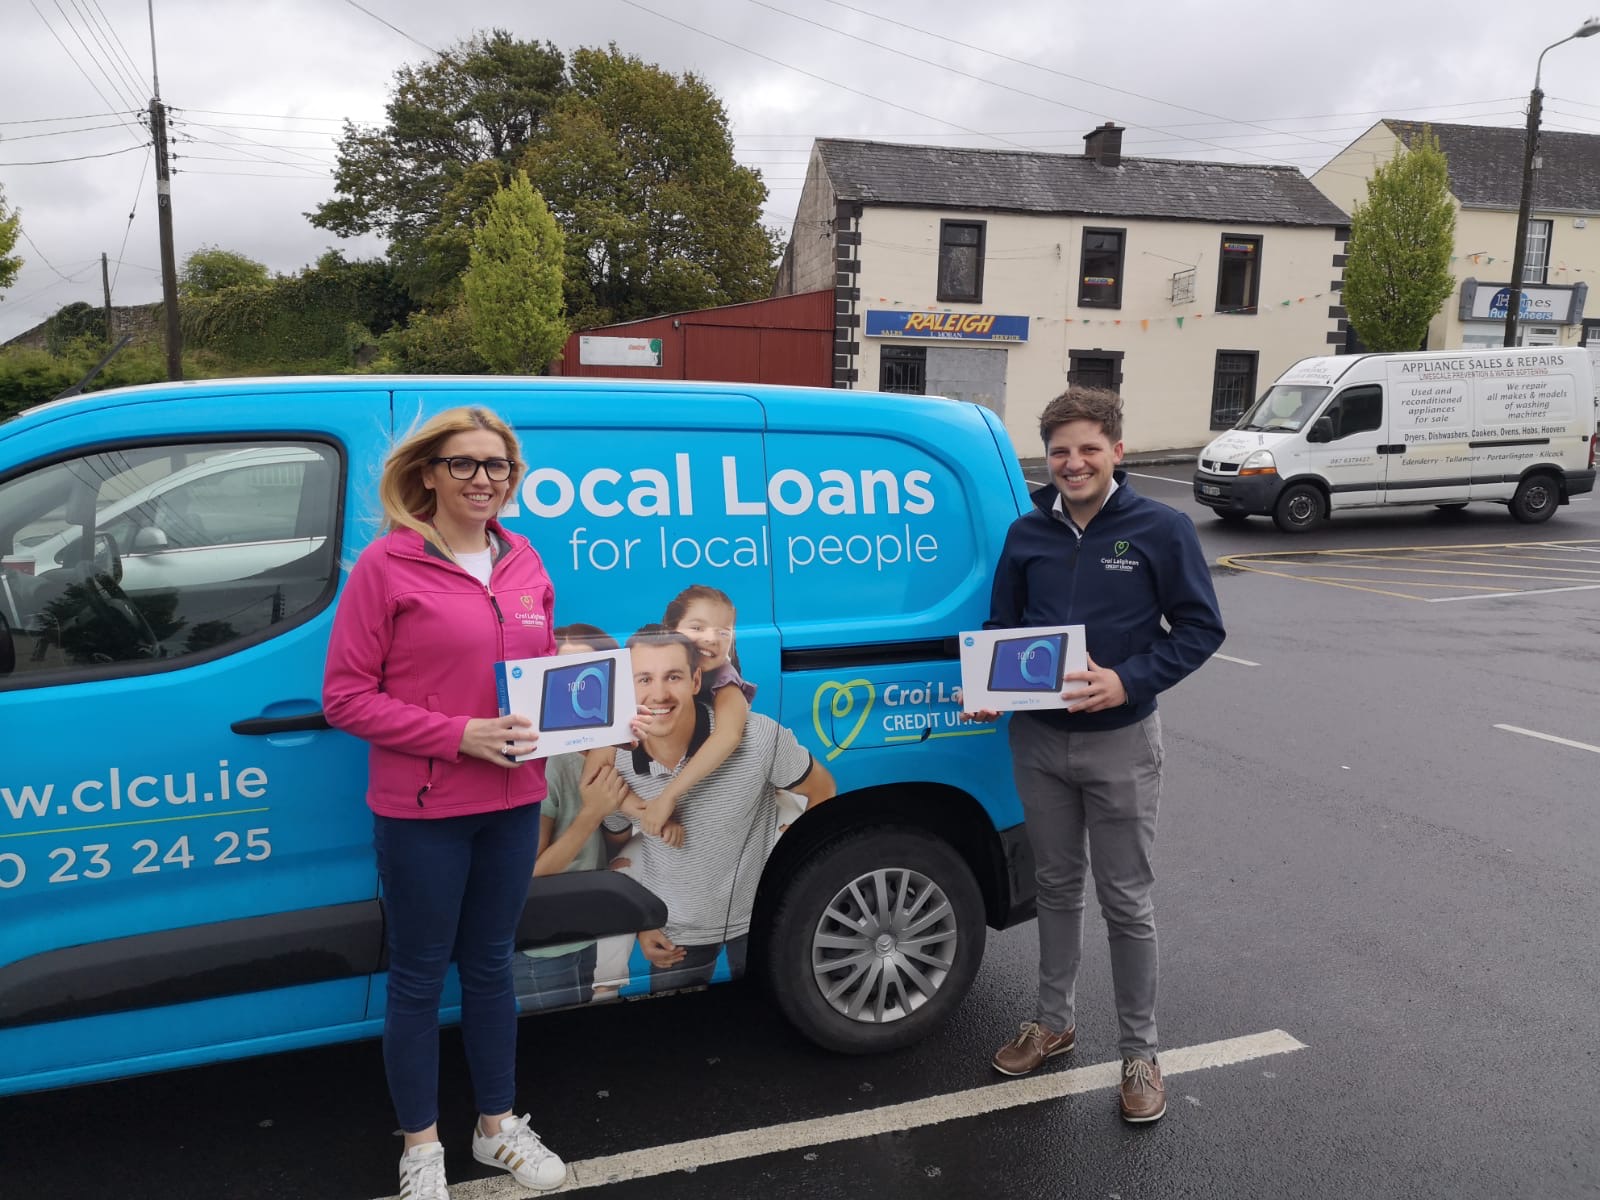 Croí Laighean Credit Union set-up Covid-19 Fund to provide financial support to charities and local organisations